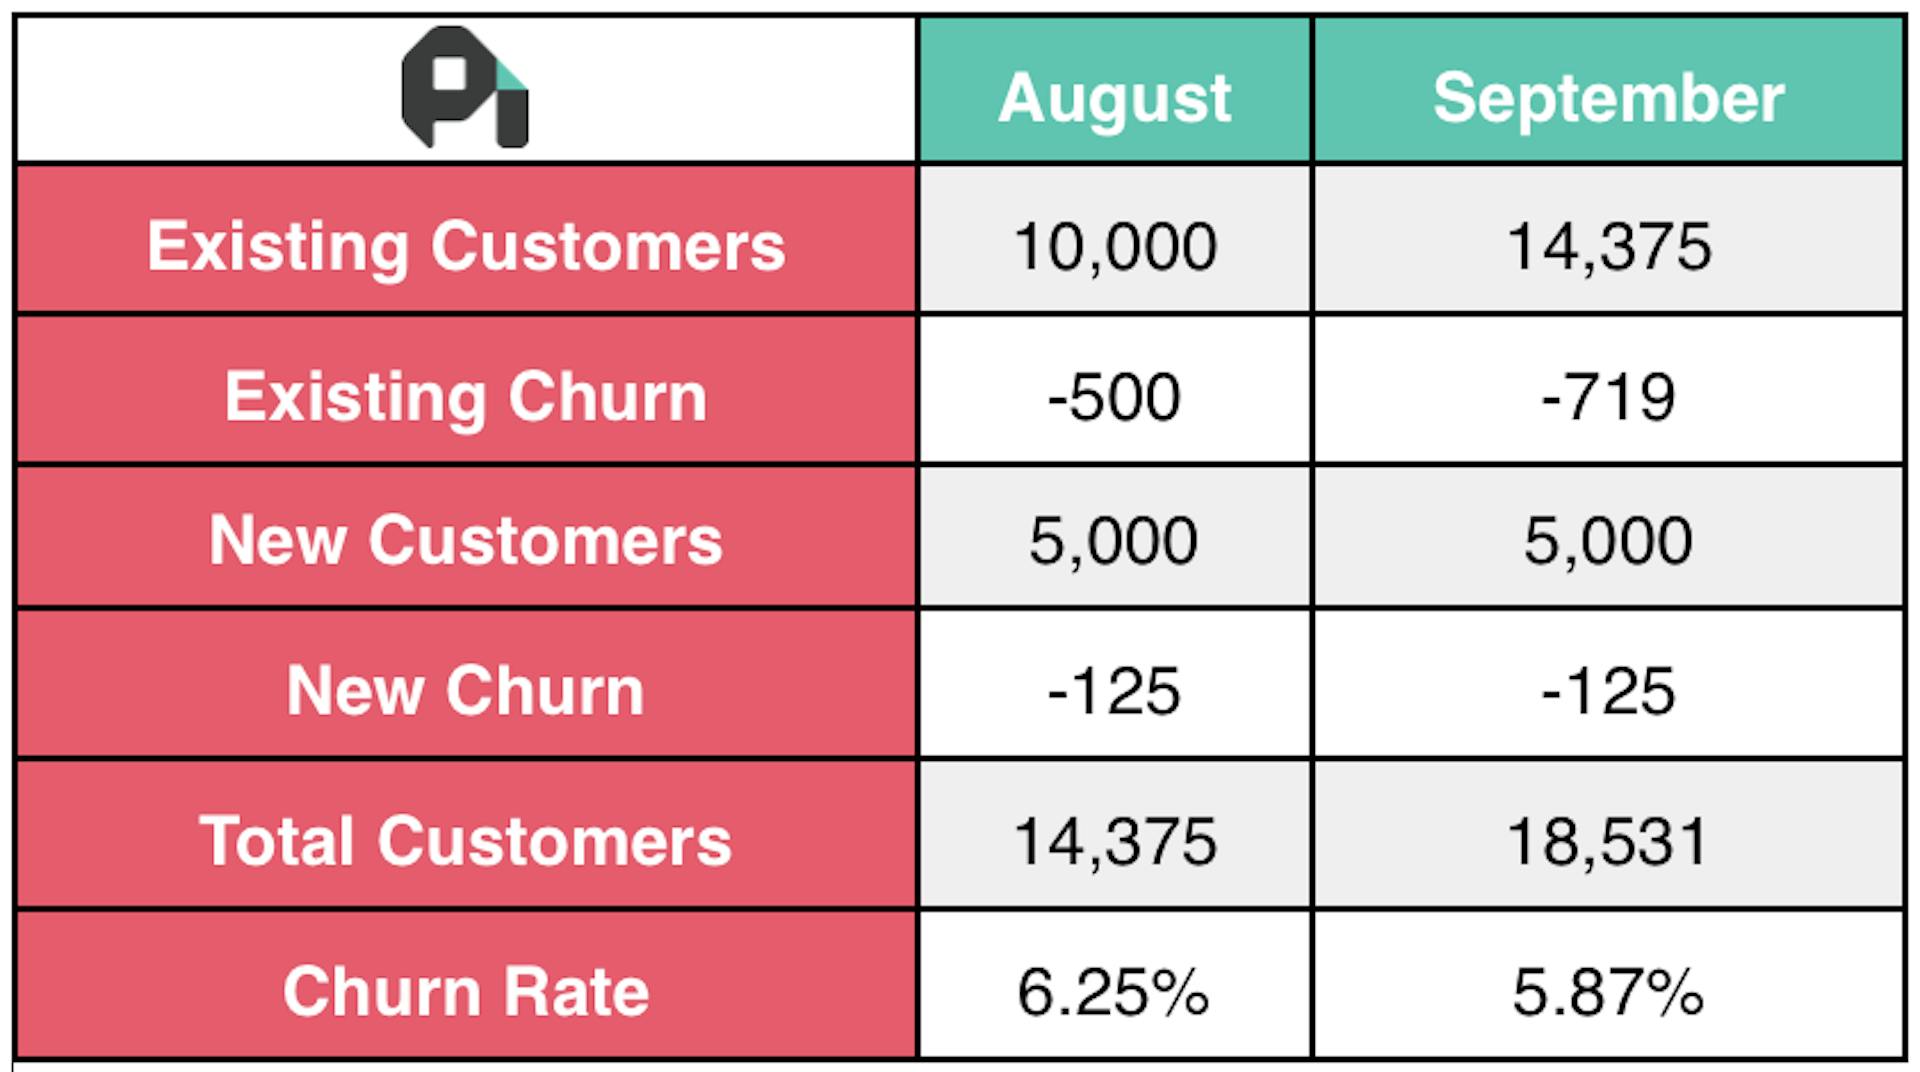 Table 1: shows varying churn rates for august and September despite same volume of new customers and new churn